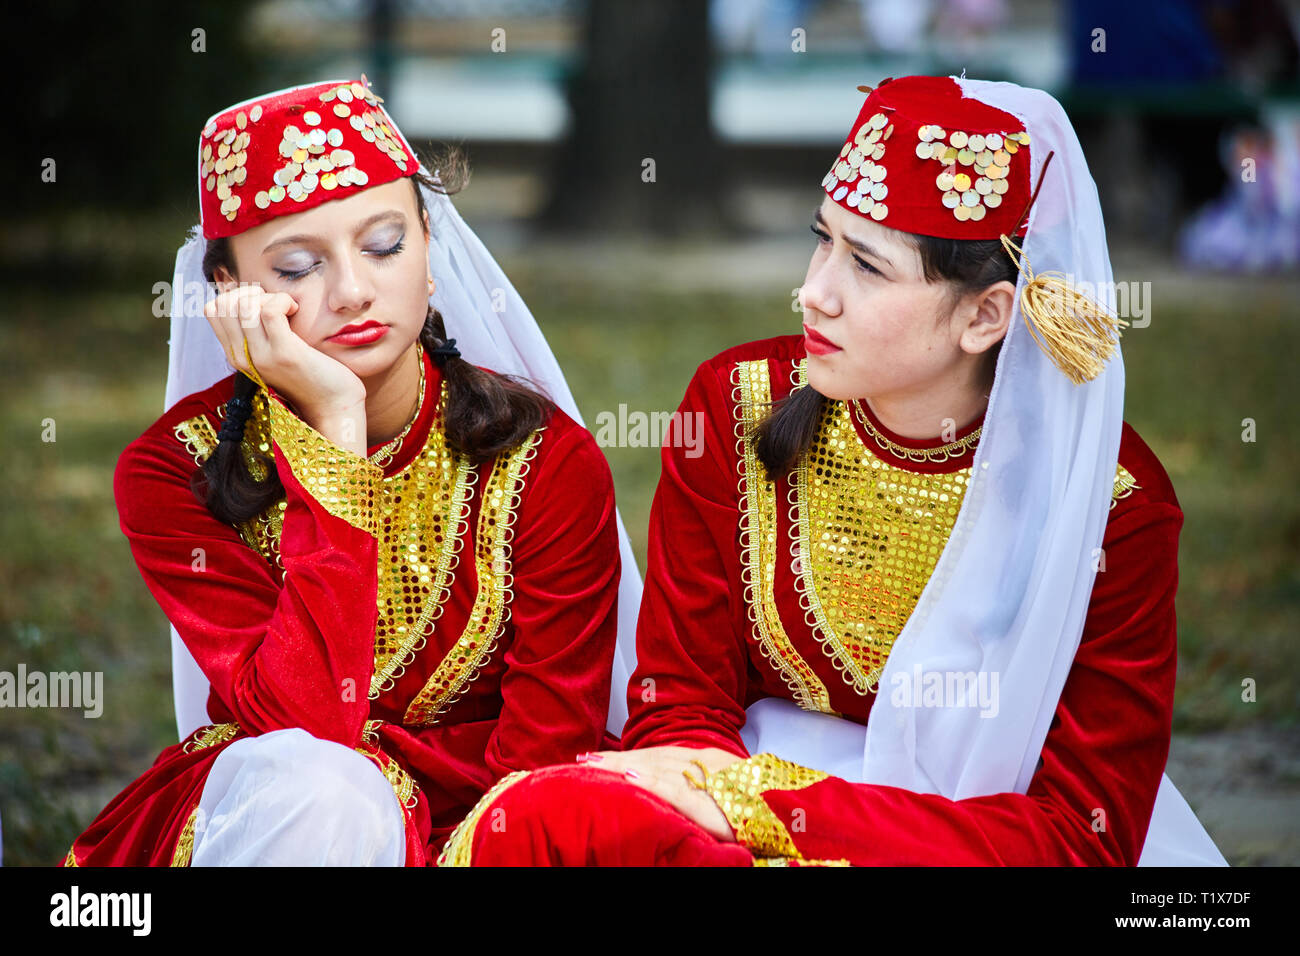 RIVNE, UKRAINE, AUGUST, 24, 2010: Two Armenian (Tatar) girls in folklore costumes are waiting for their performance at the International Folklore Fest Stock Photo